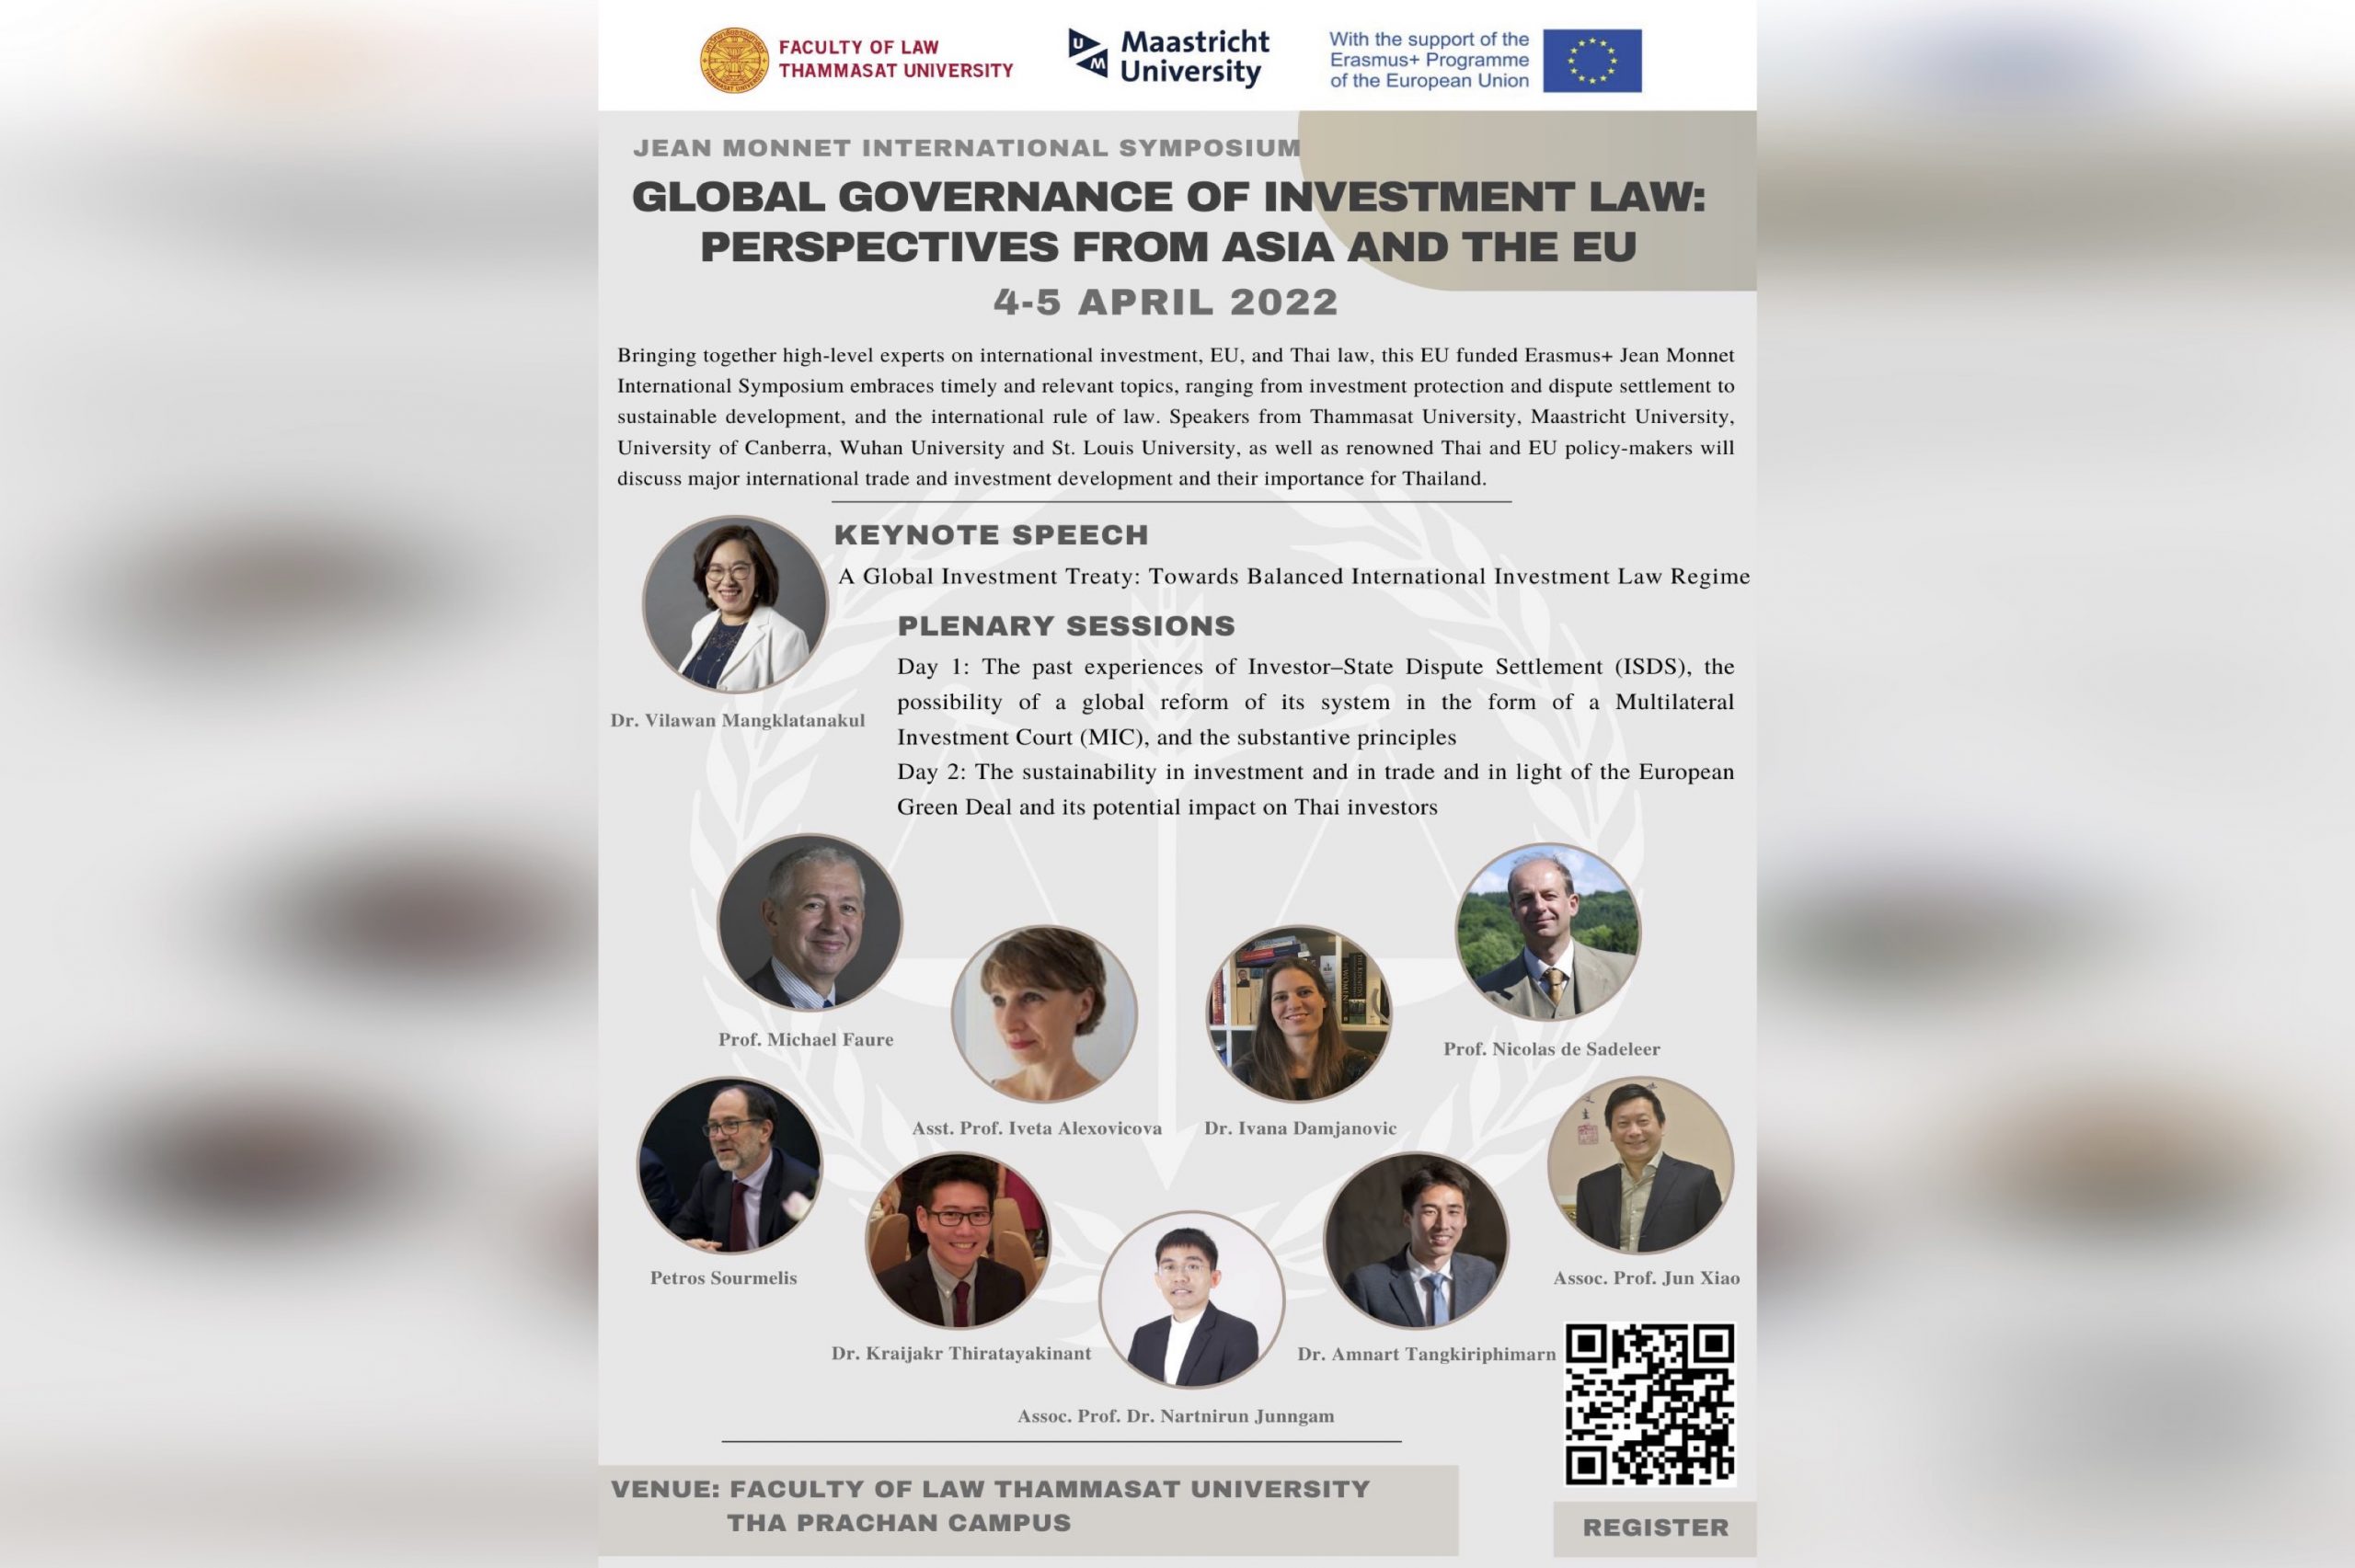 Jean Monnet International Symposium – Global Governance of Investment Law: Perspectives from Asia and the EU